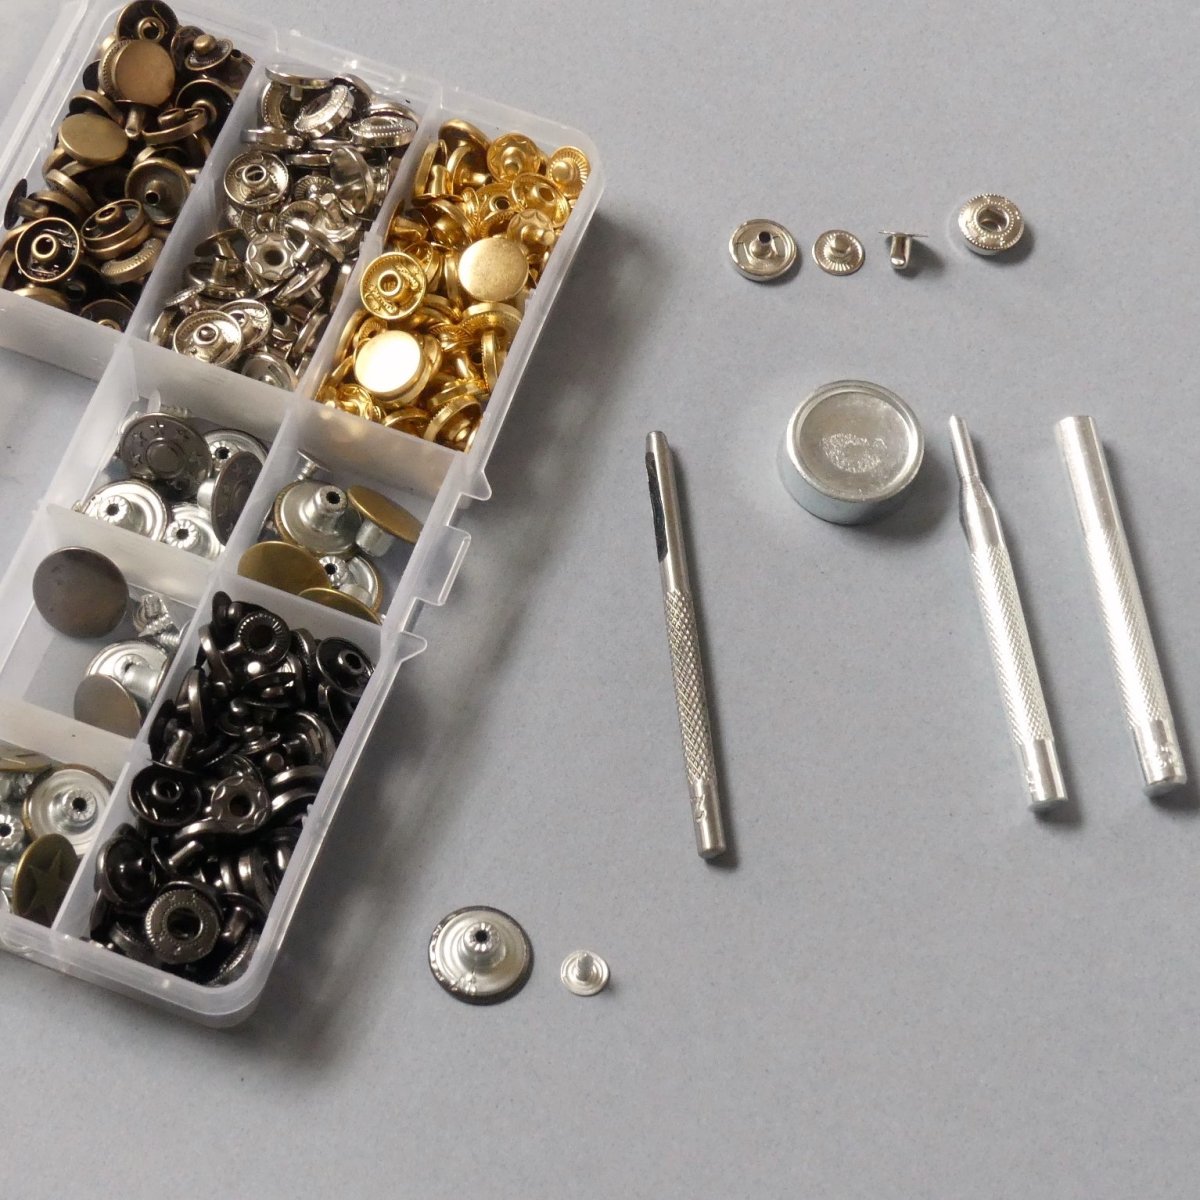 a metal snap button set with the tools to install the buttons on fabric or clothing